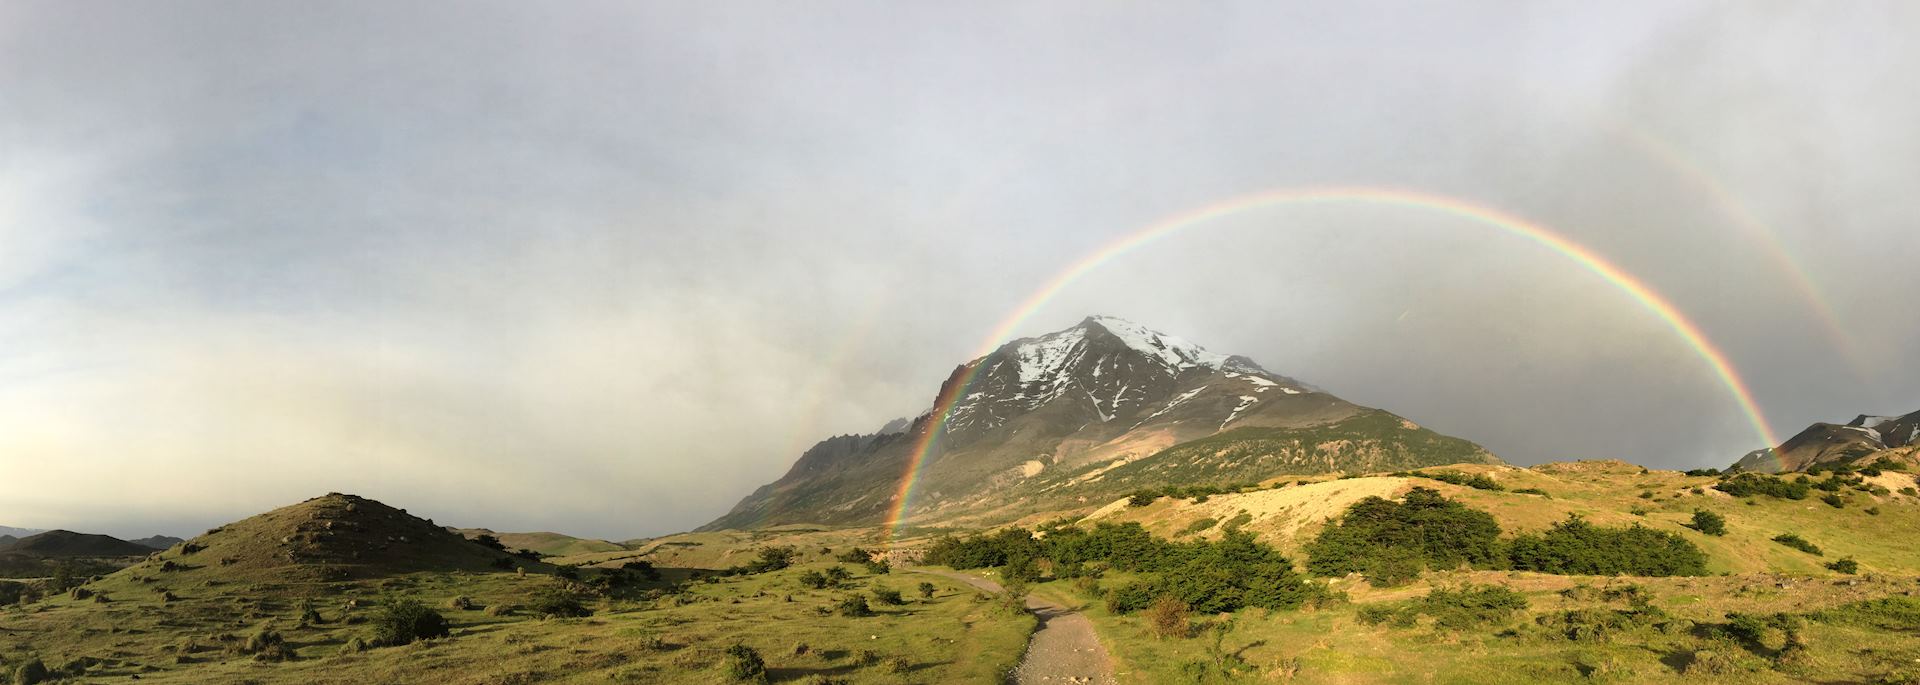 Rainbow in mountains in Chile